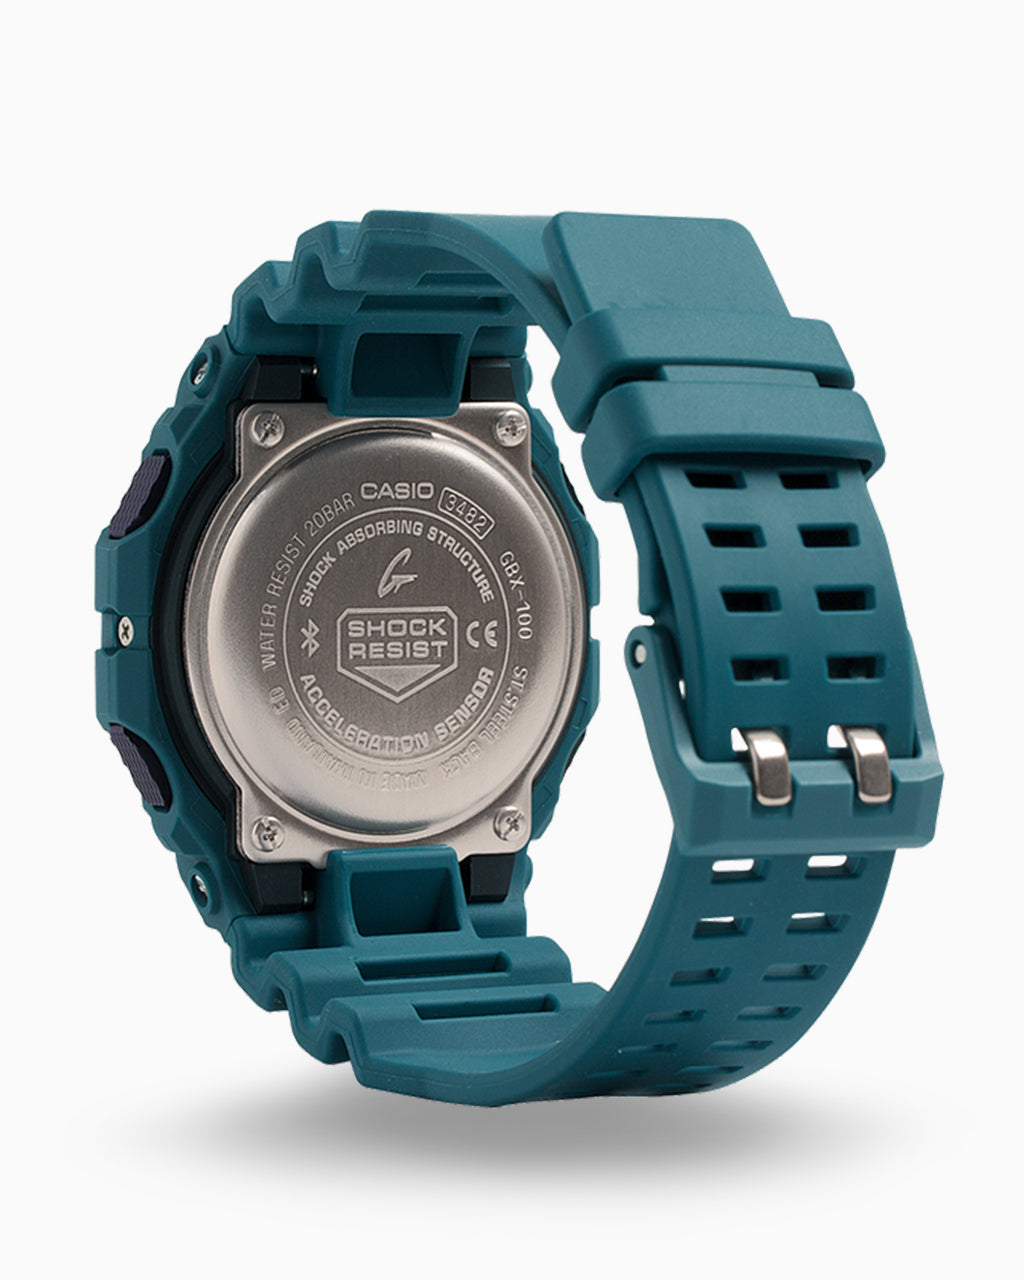 Experience the Casio G-Shock GBX100-2 Men's Watch in Teal